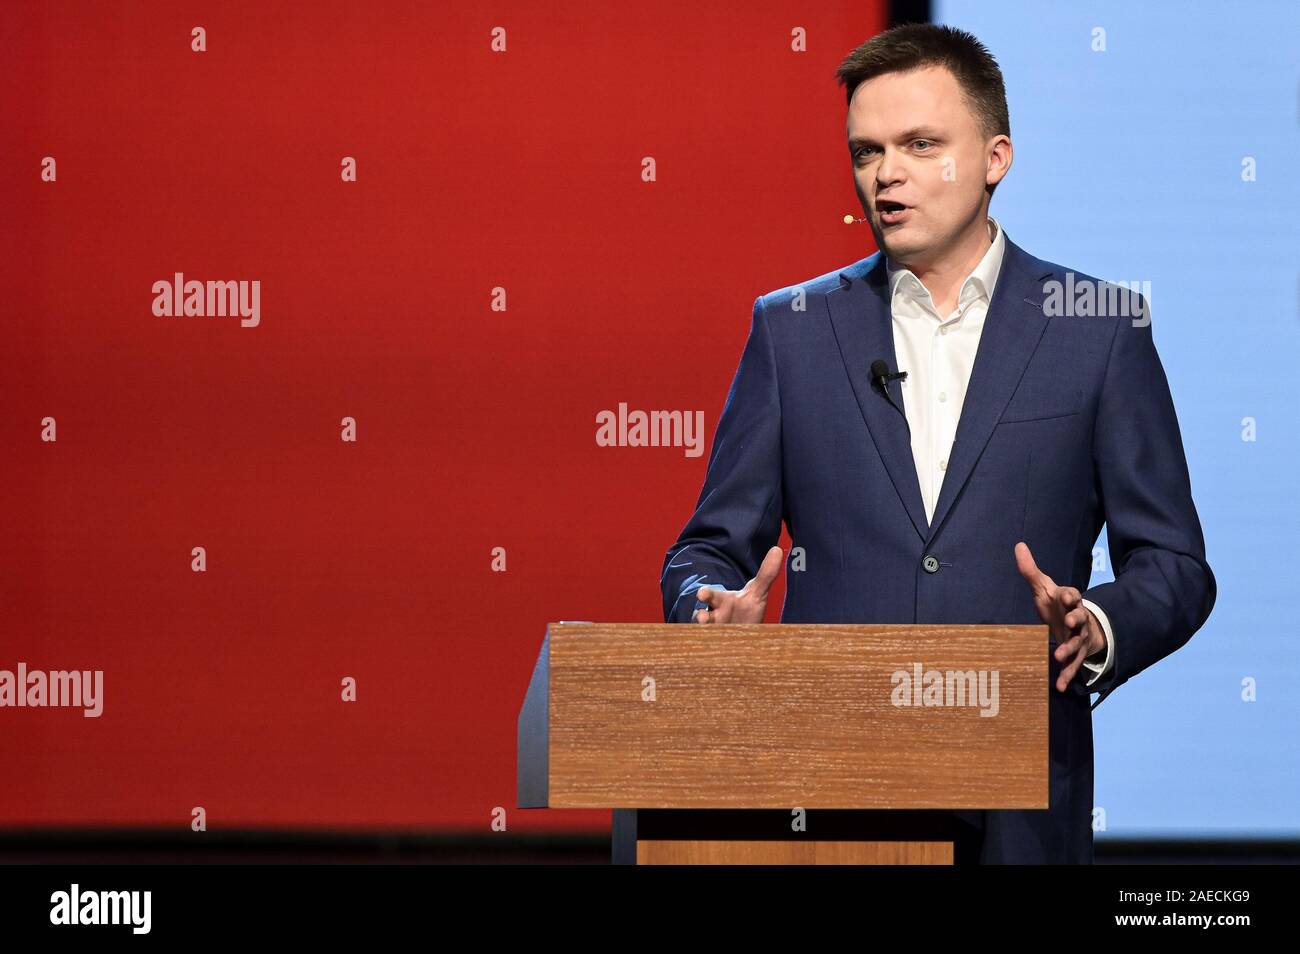 Szymon Holownia announce his presidential campaign for 2020 during a press conference. He is a polish journalist, writer and publicist famous for hosting a Poland Got Talent TV programme. Stock Photo